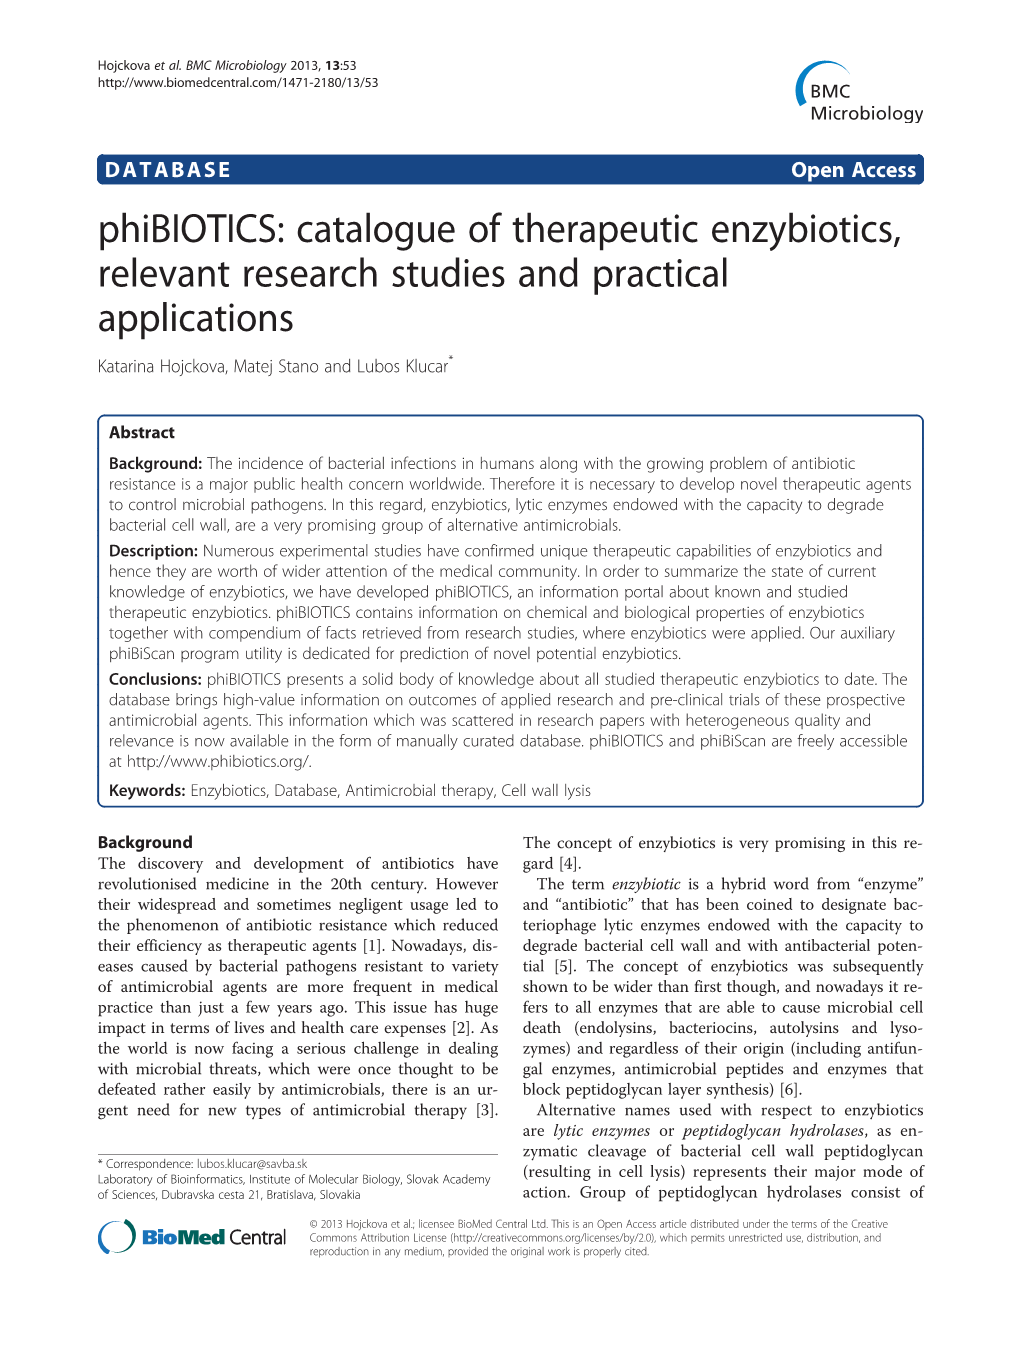 Phibiotics: Catalogue of Therapeutic Enzybiotics, Relevant Research Studies and Practical Applications Katarina Hojckova, Matej Stano and Lubos Klucar*